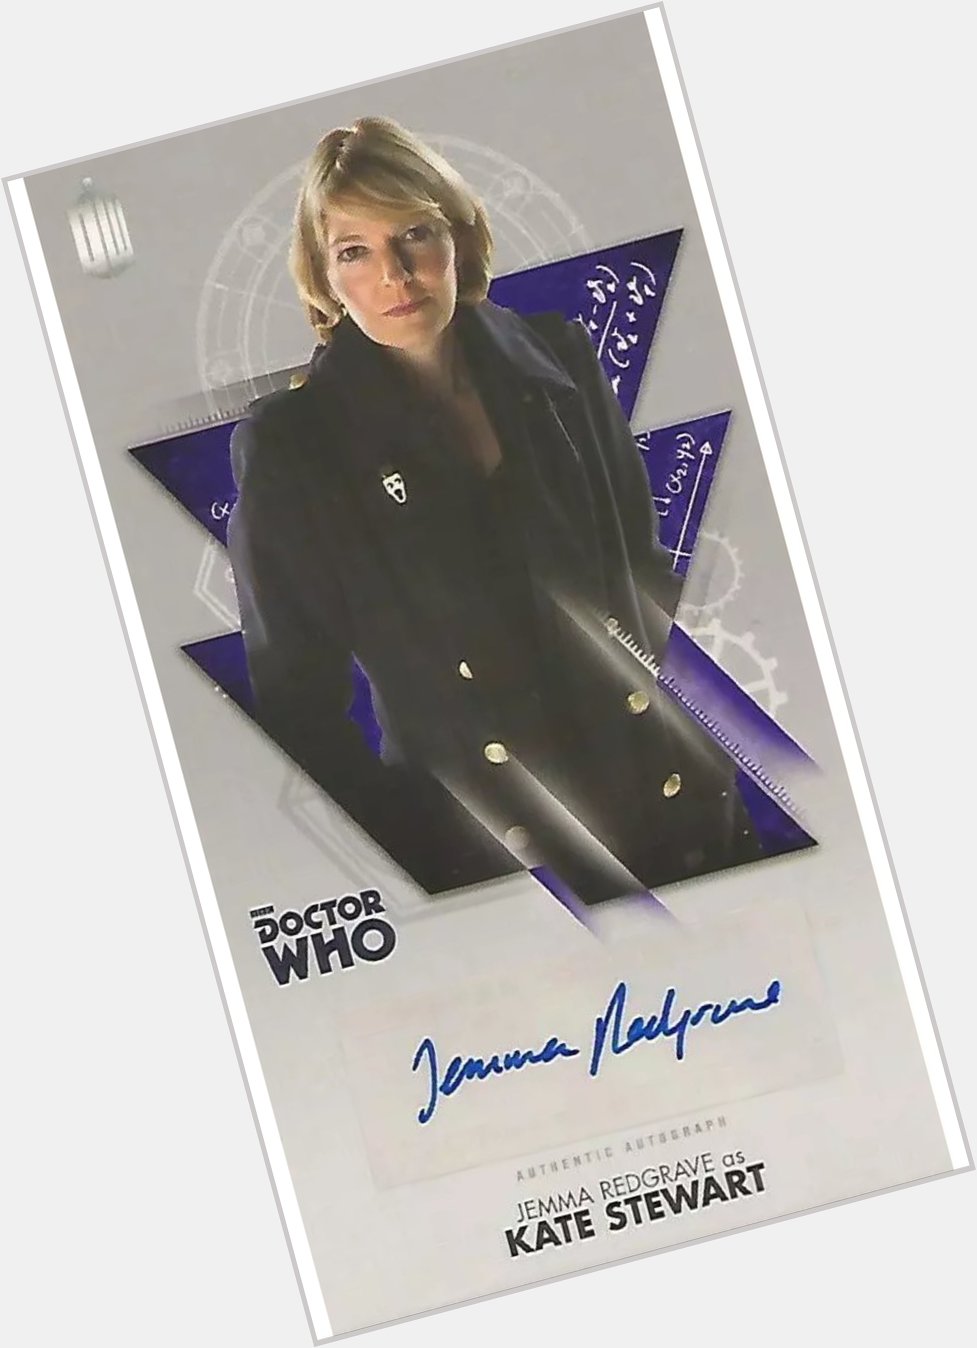 Happy Birthday to the one and only Jemma Redgrave!  